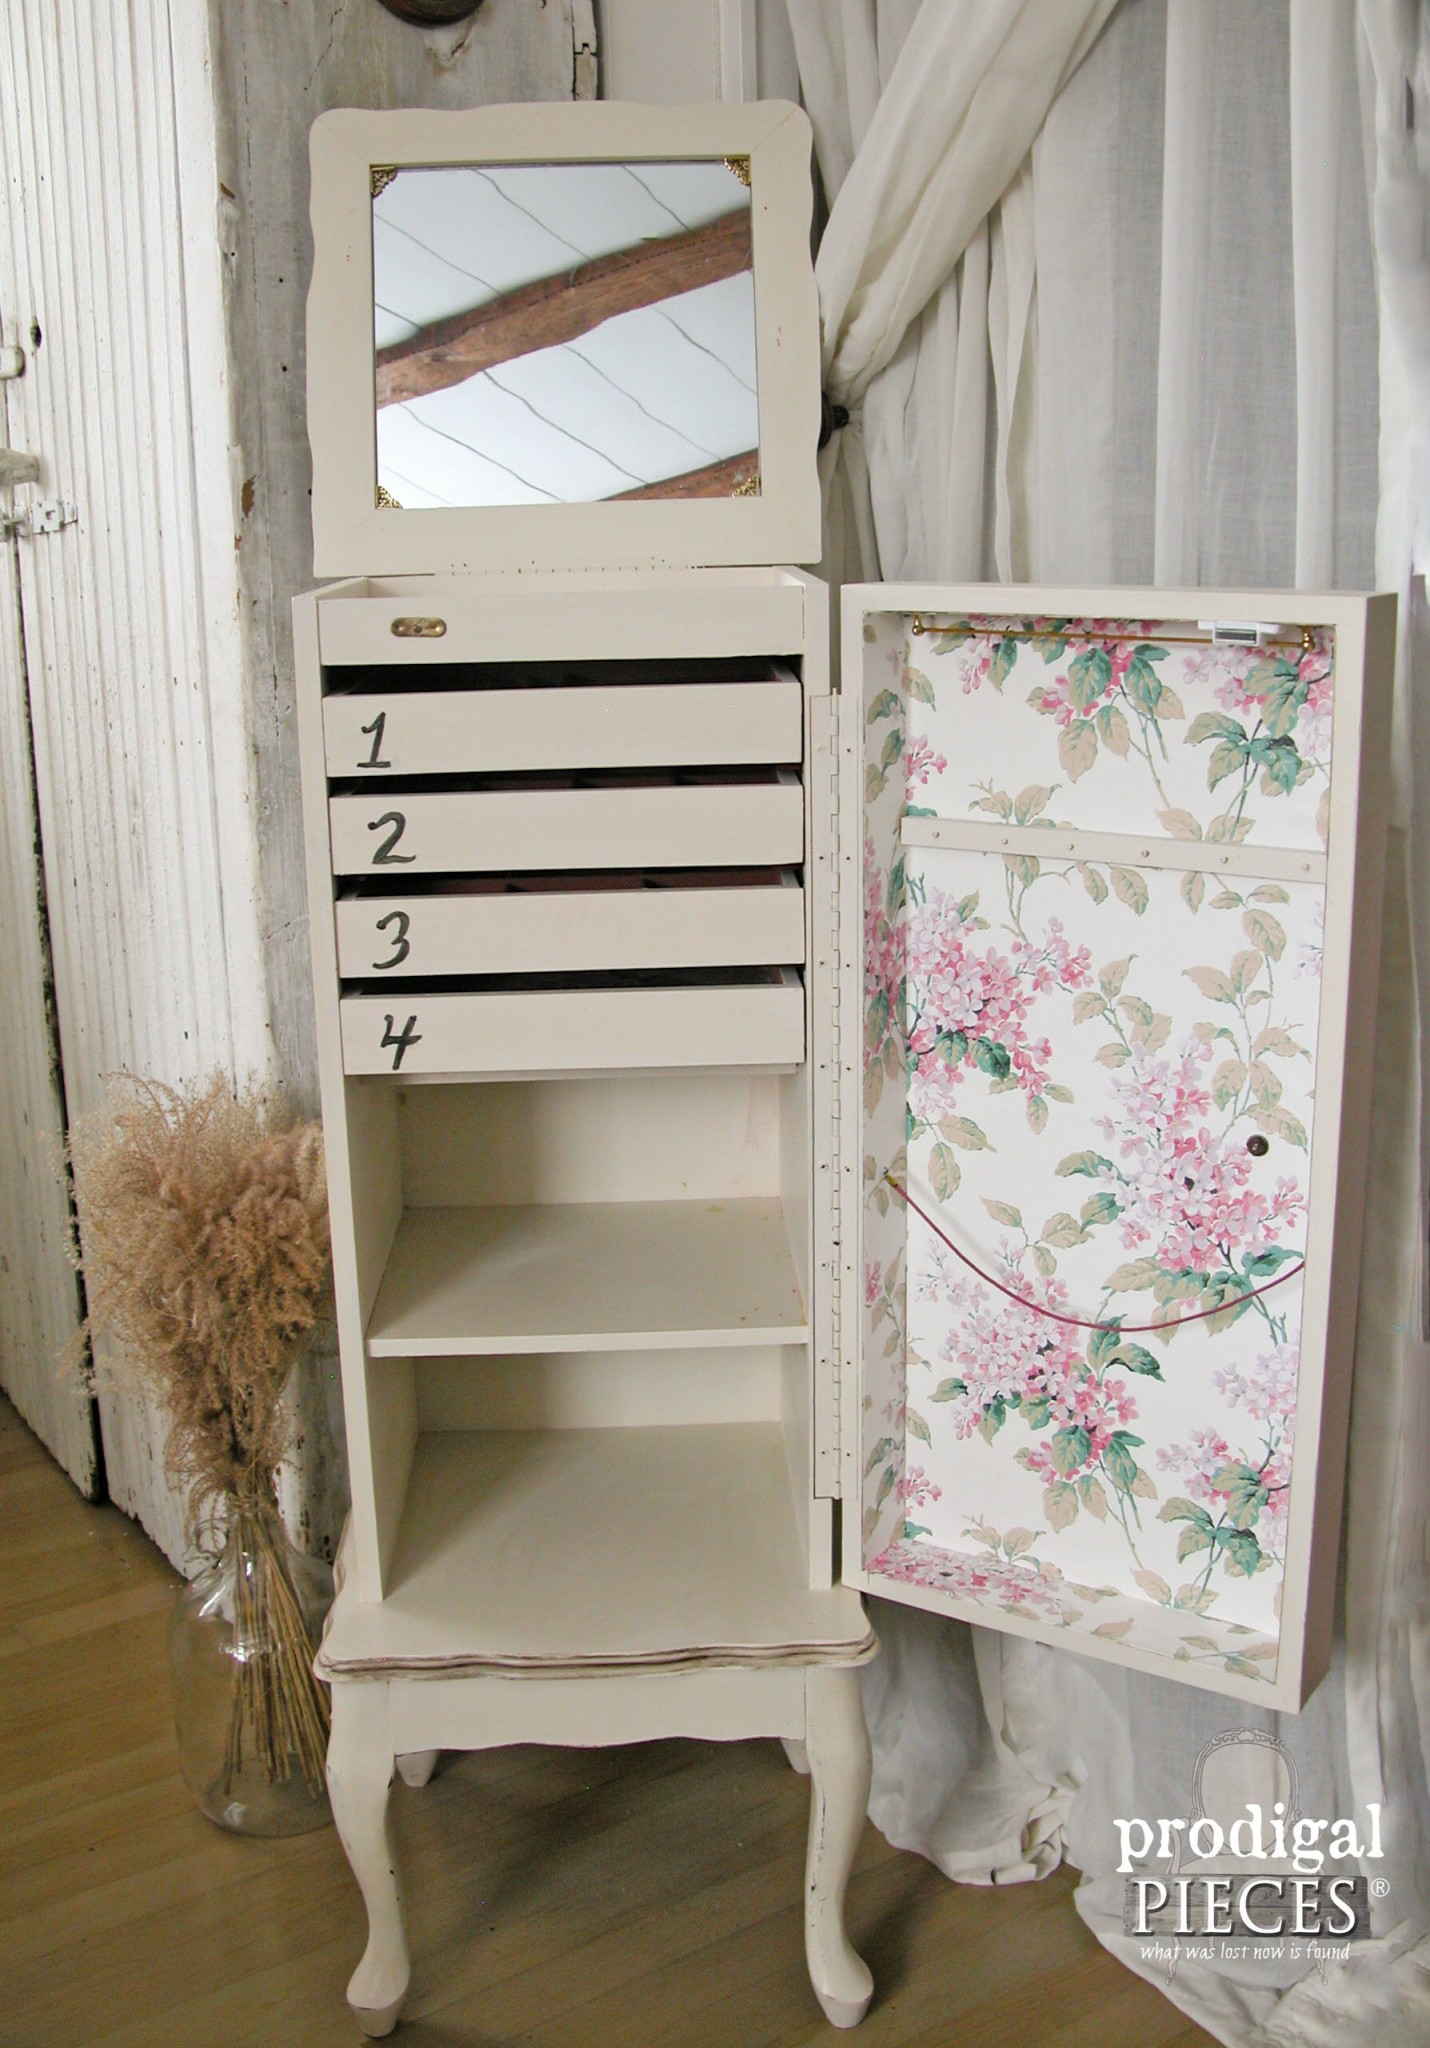 Refinished Jewelry Armoire with Wallpaper by Prodigal Pieces | prodigalpieces.com